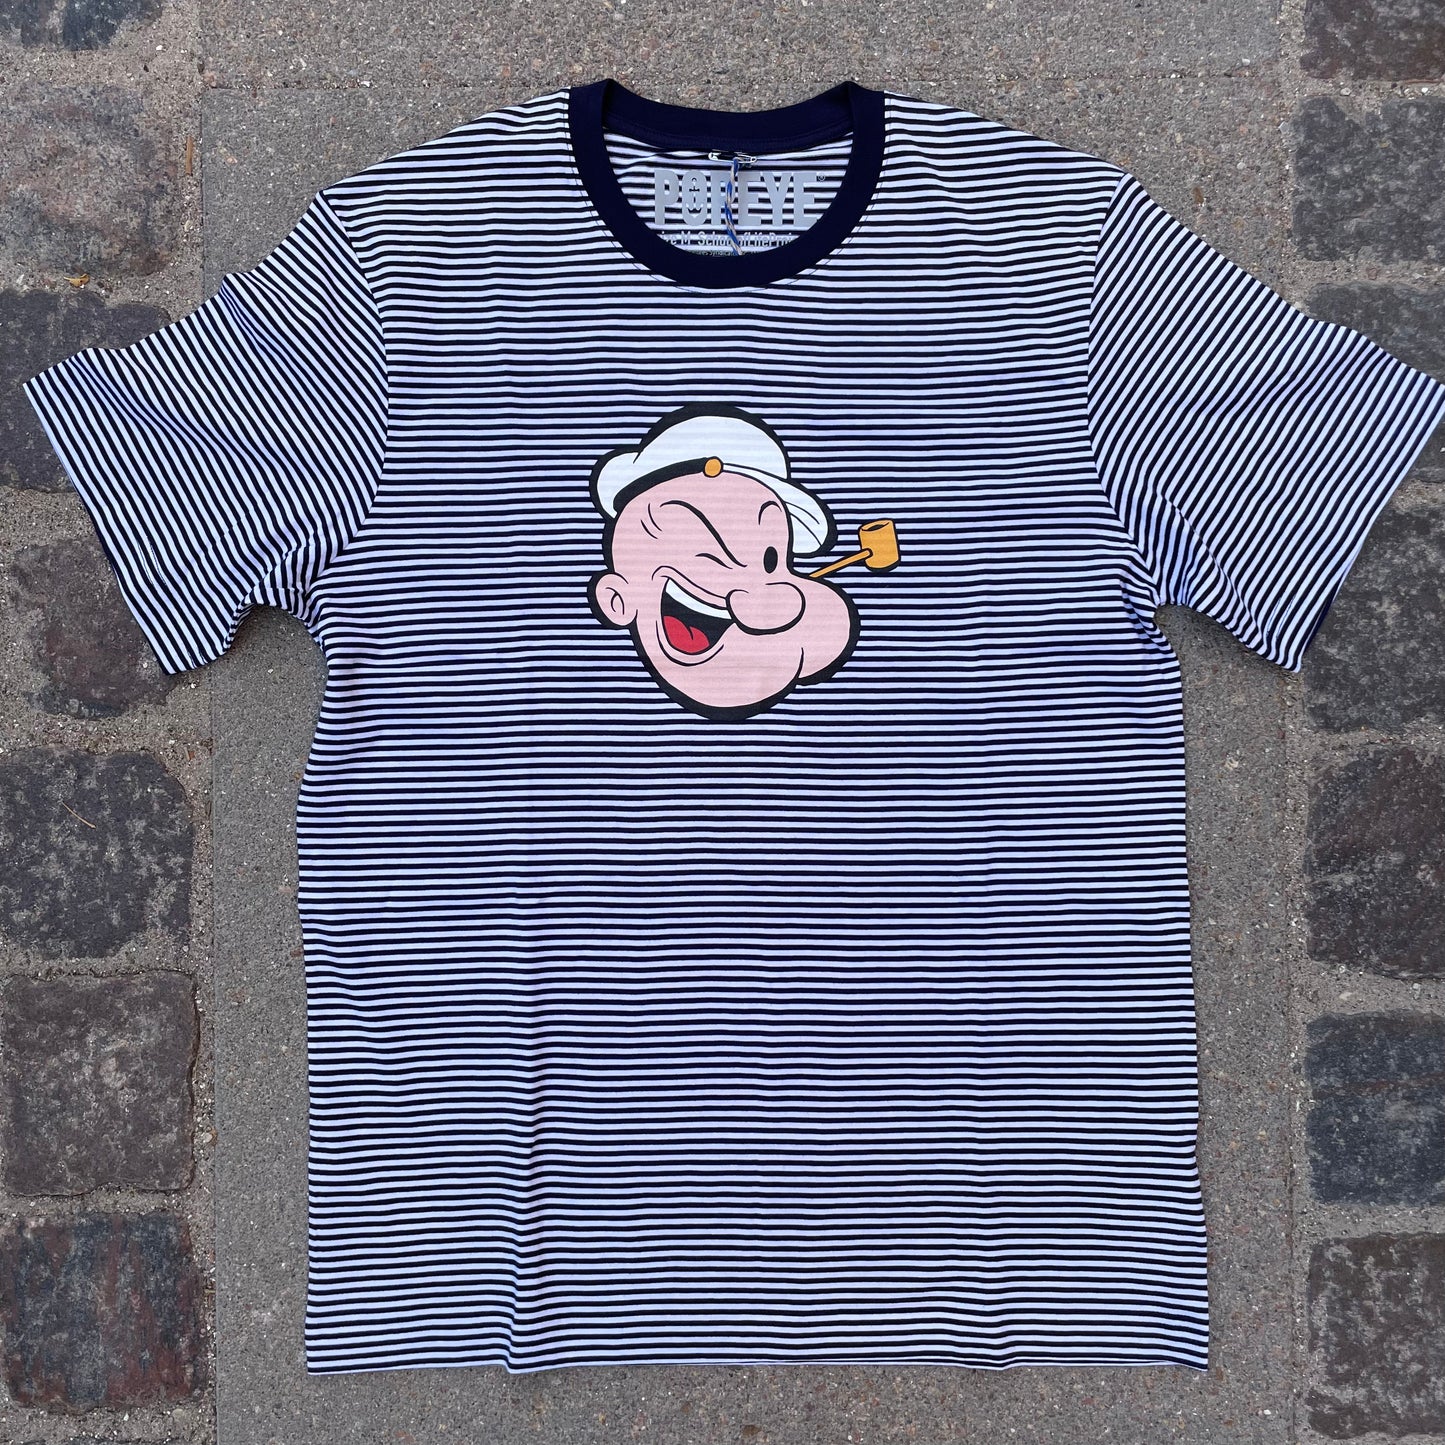 School of Life Projects - Popeye Striped Tee (white/navy)